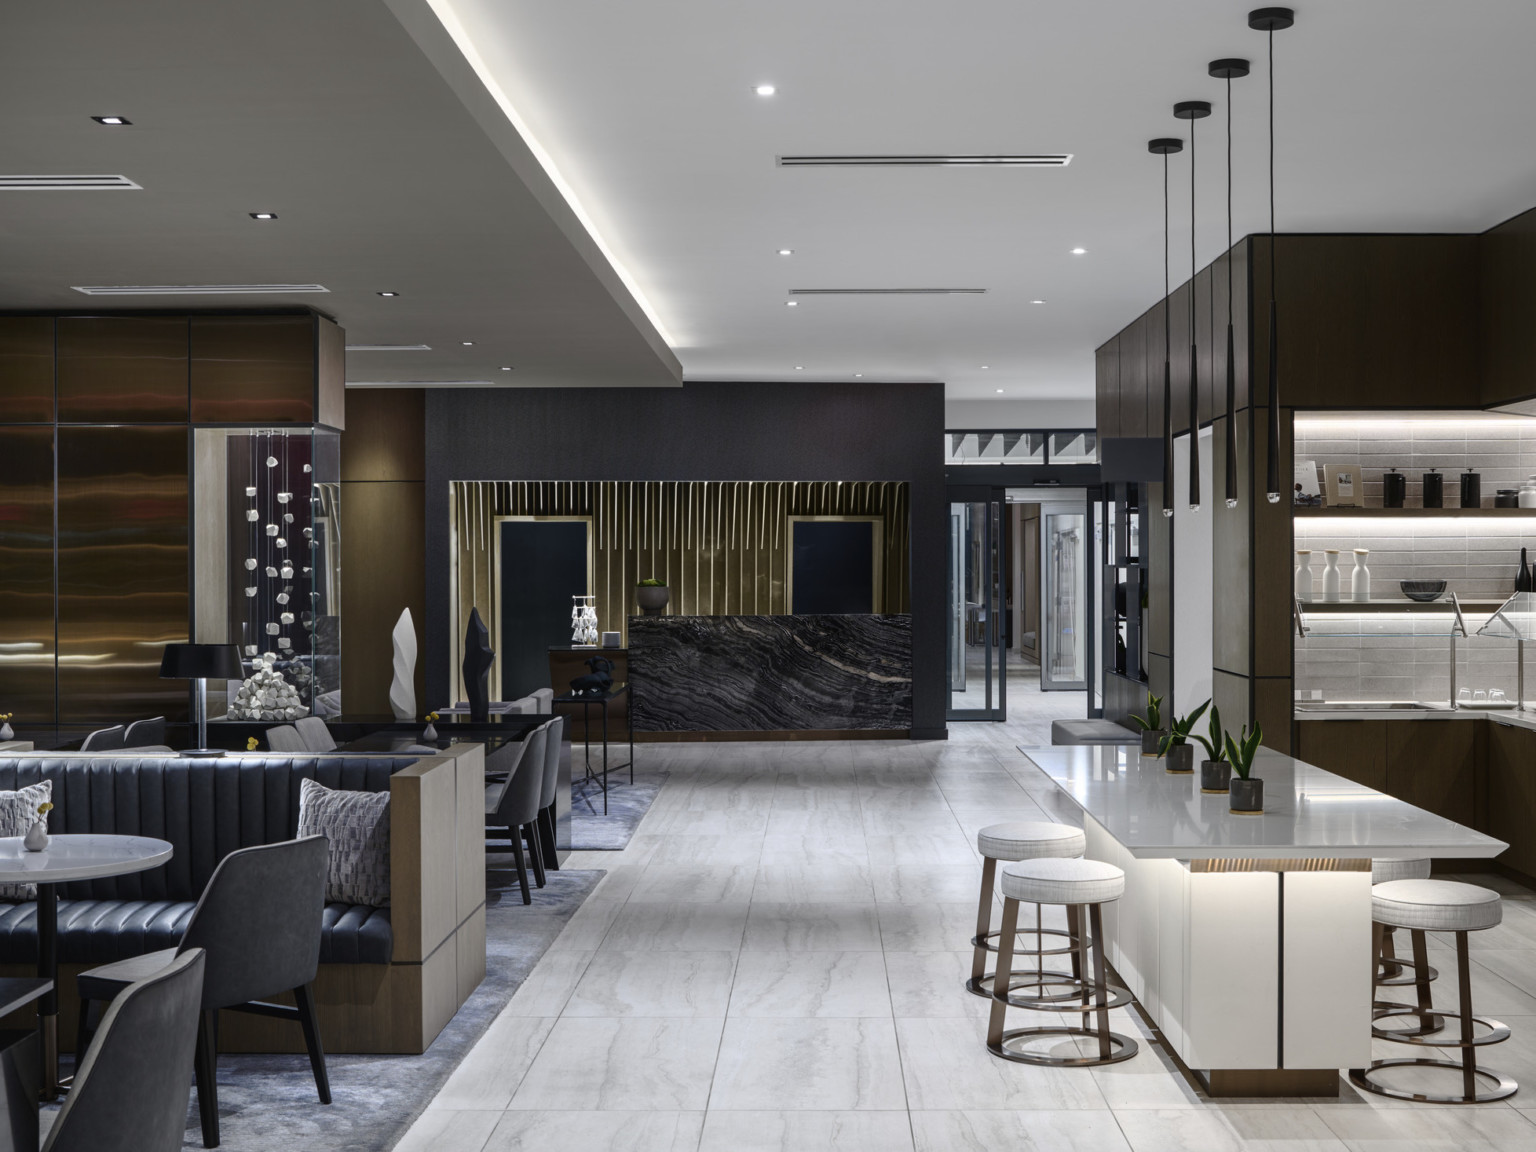 Overall view of lobby and lounge featuring layered artwork, millwork detailing, and dark stone with white stone and furniture